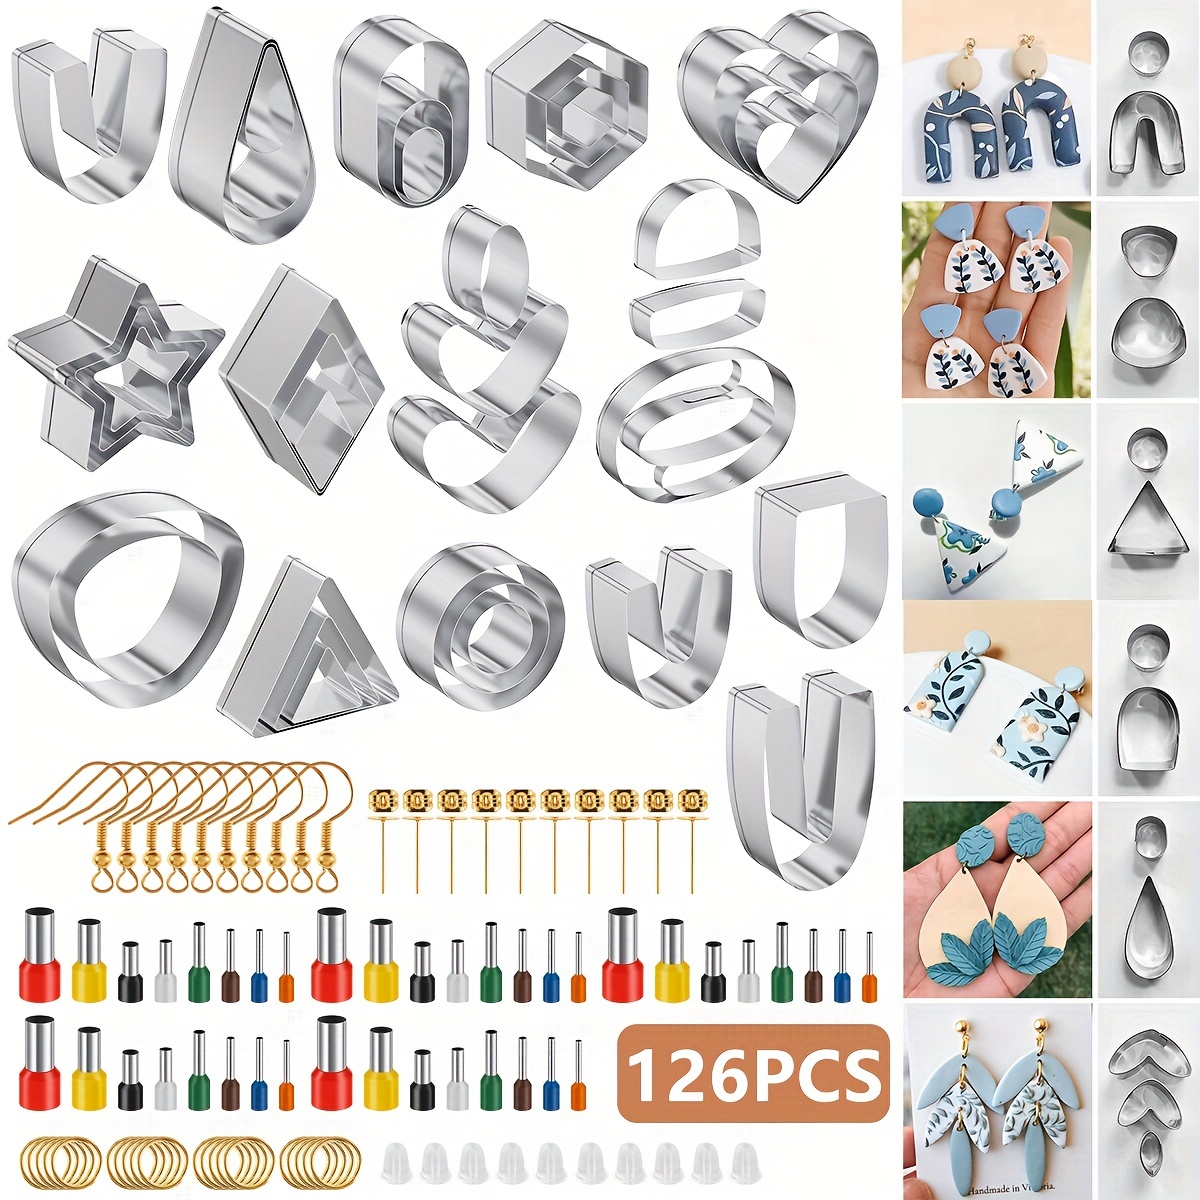 142pcs Clay Cutters Set Polymer Clay Cutters Set with 24 Shapes Stainless Steel Clay Earring Cutters with Earring Accessories Stainless Steel Clay